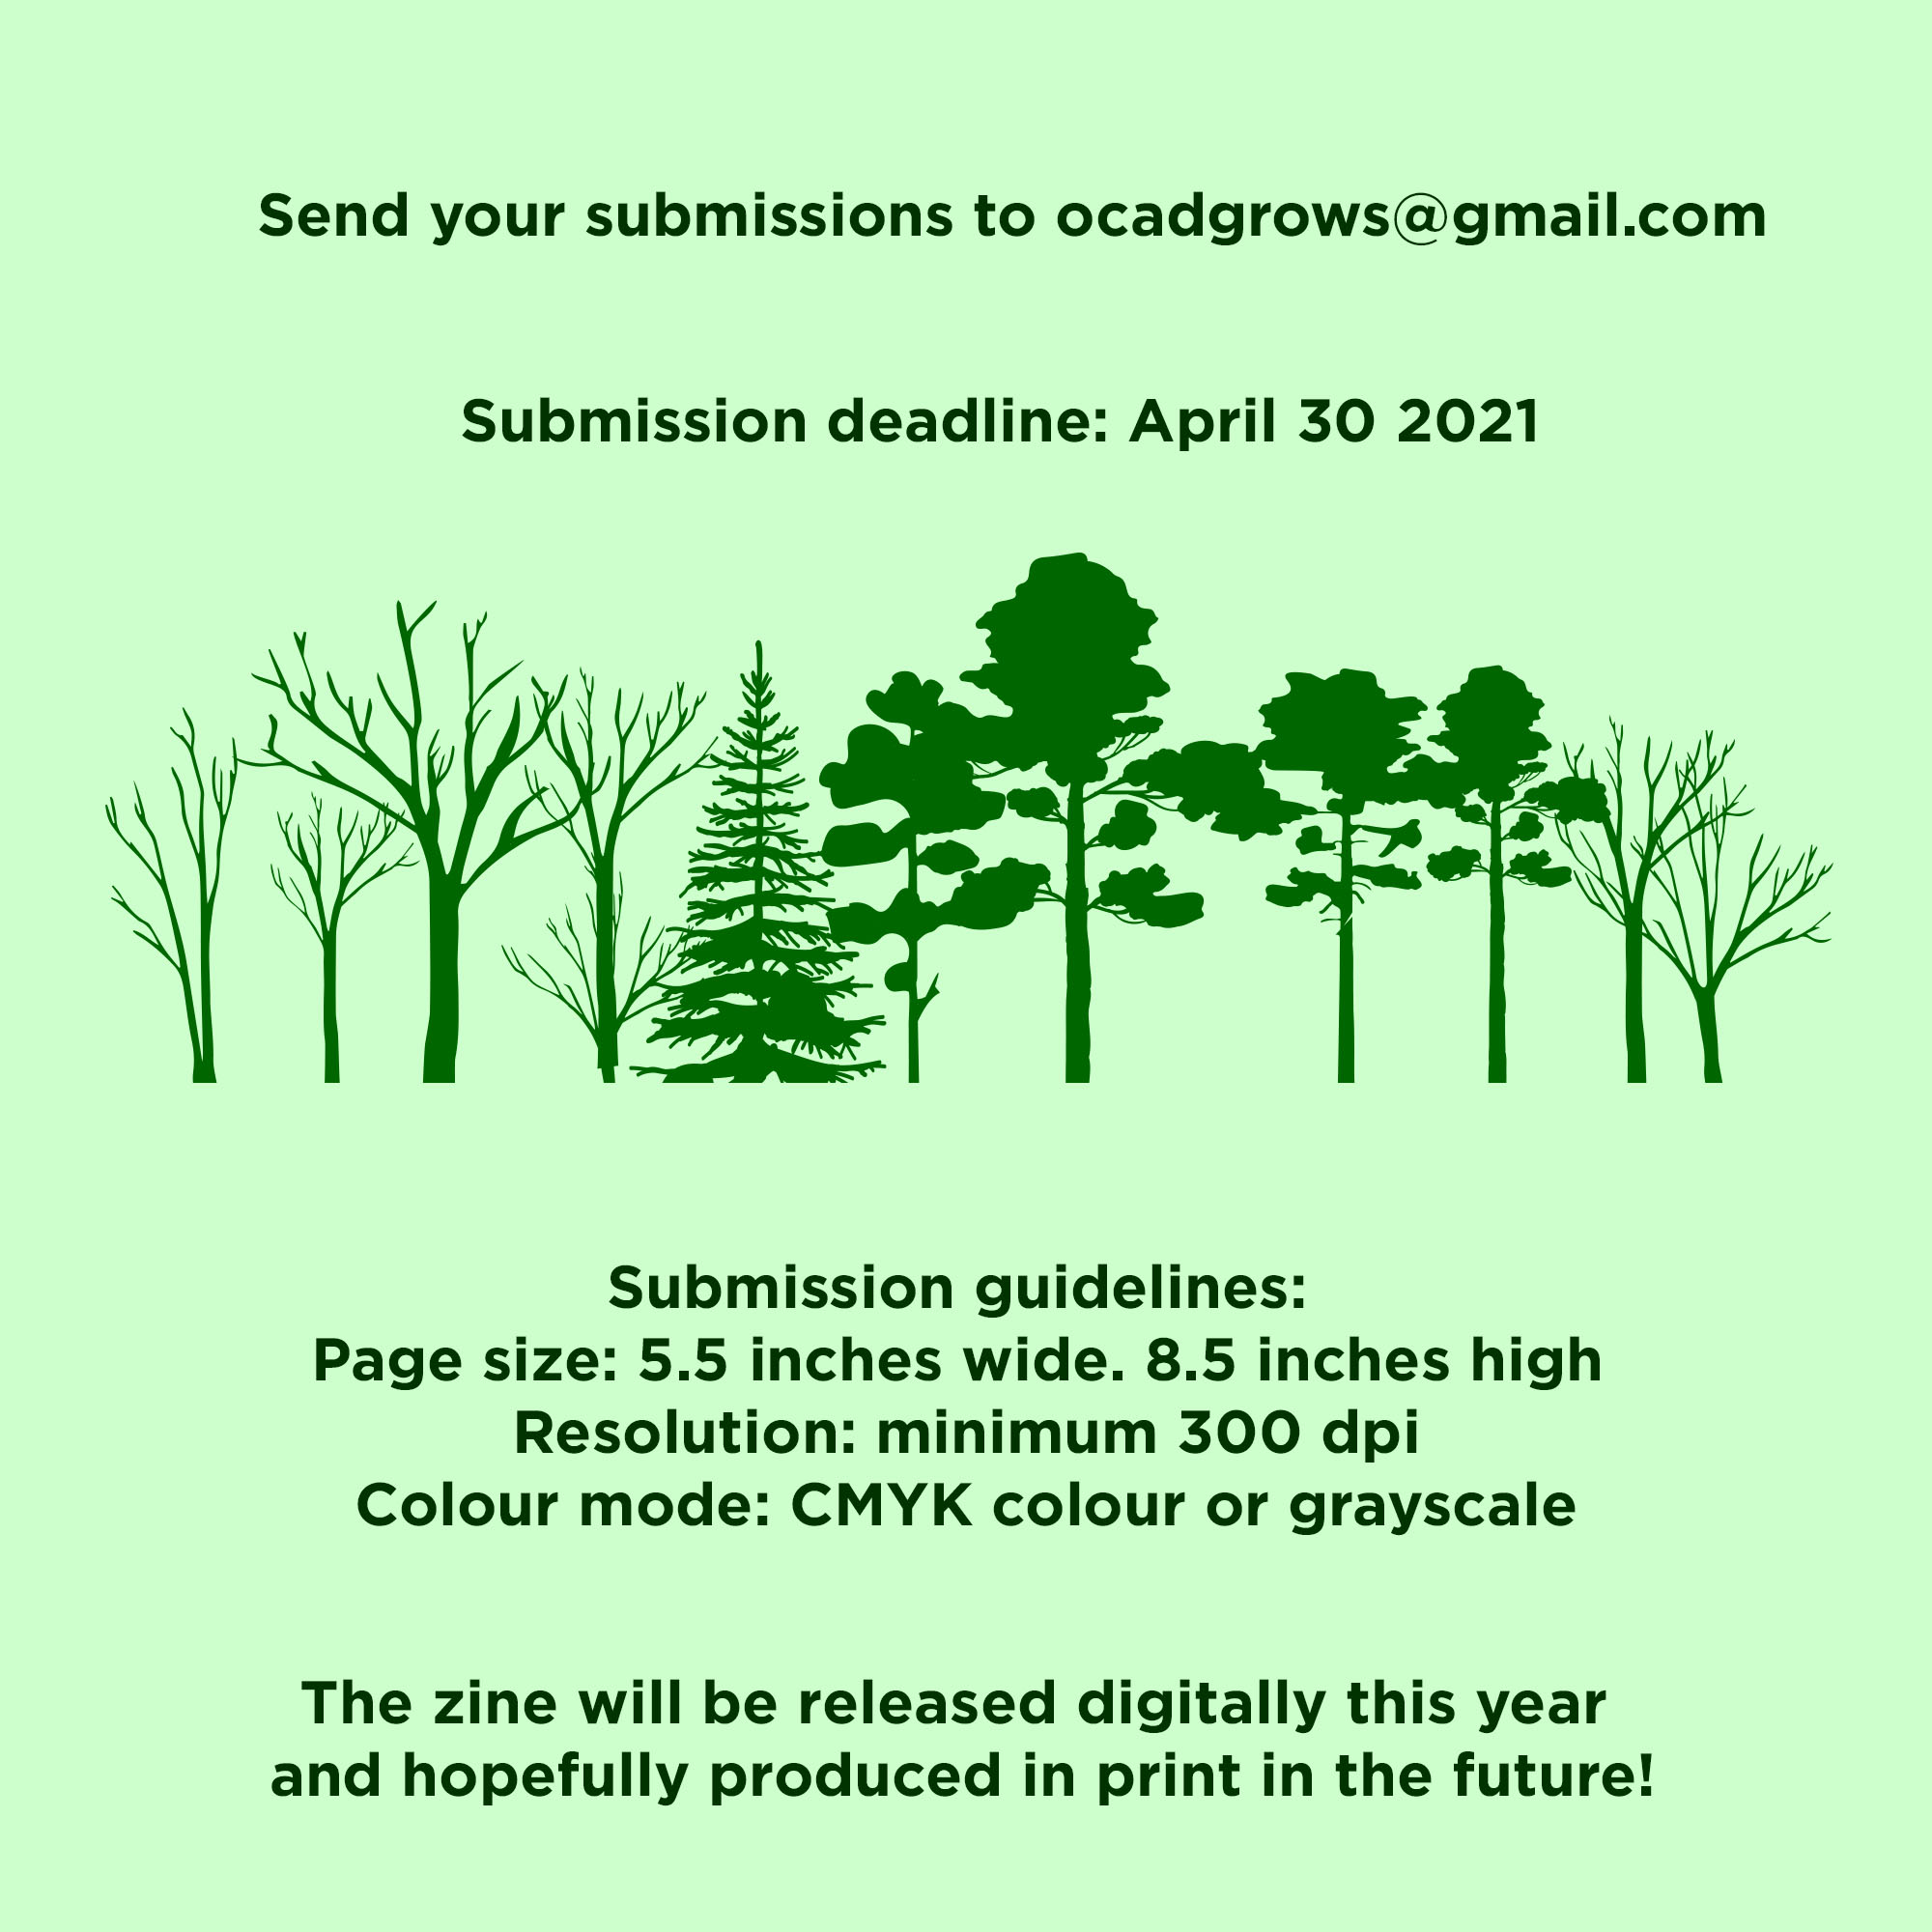 Send your submissions to ocadgrows@gmail.com Submission deadline: April 30 2021  Submission guidelines:  Page size: 5.5 inches wide. 8.5 inches high  Resolution: minimum 300 dpi Colour mode: CMYK colour or grayscale